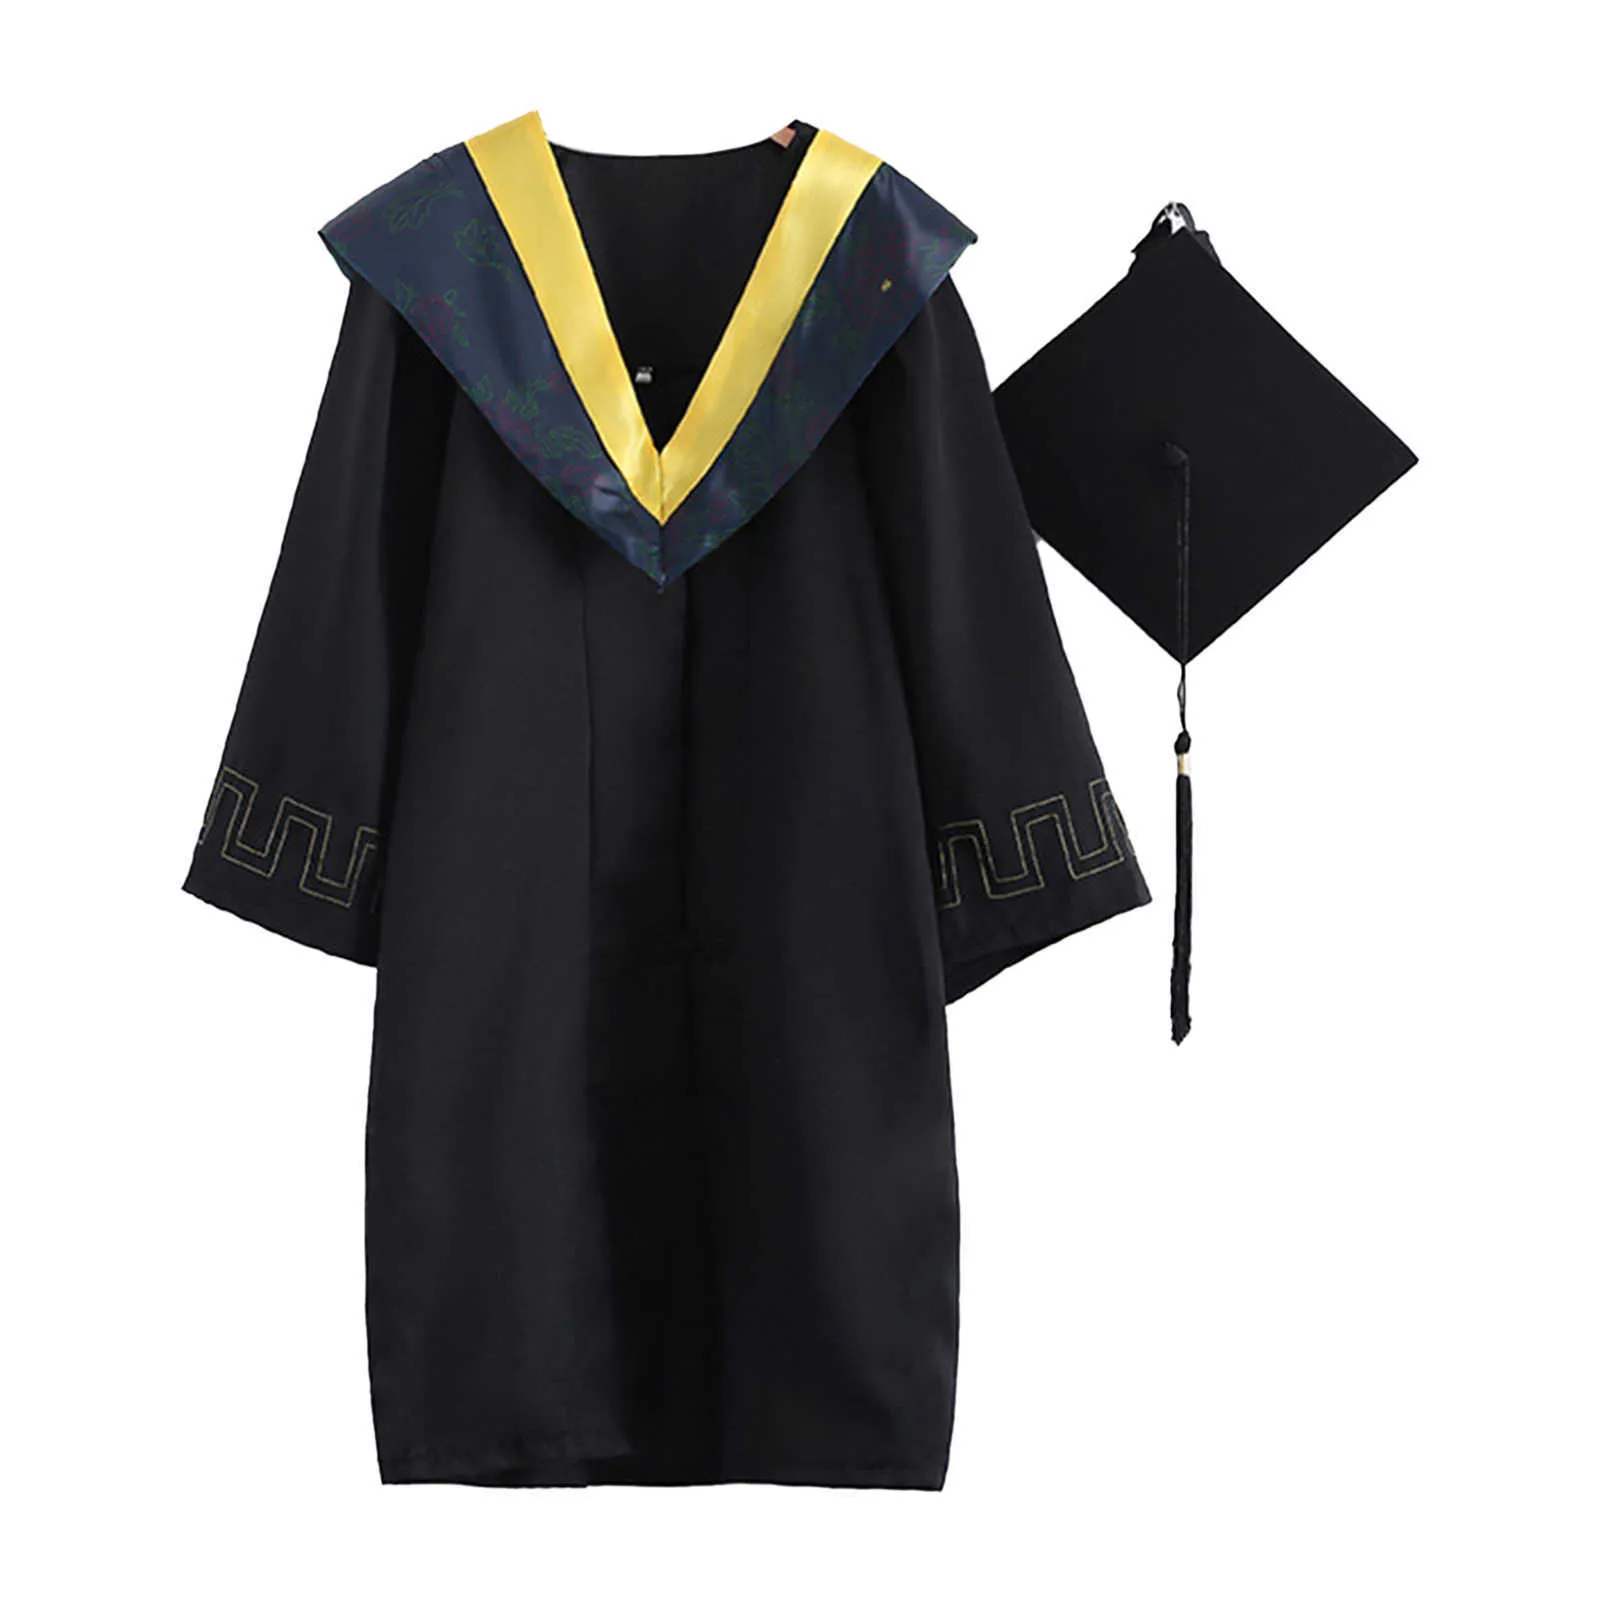 Buy Kaku Fancy Dresses Graduation Gown With Hat & Stole/Scarf | Degree  Costume For Convocation Dress For Boys & Girls (Black, 10-12 Years) Online  at Low Prices in India - Amazon.in